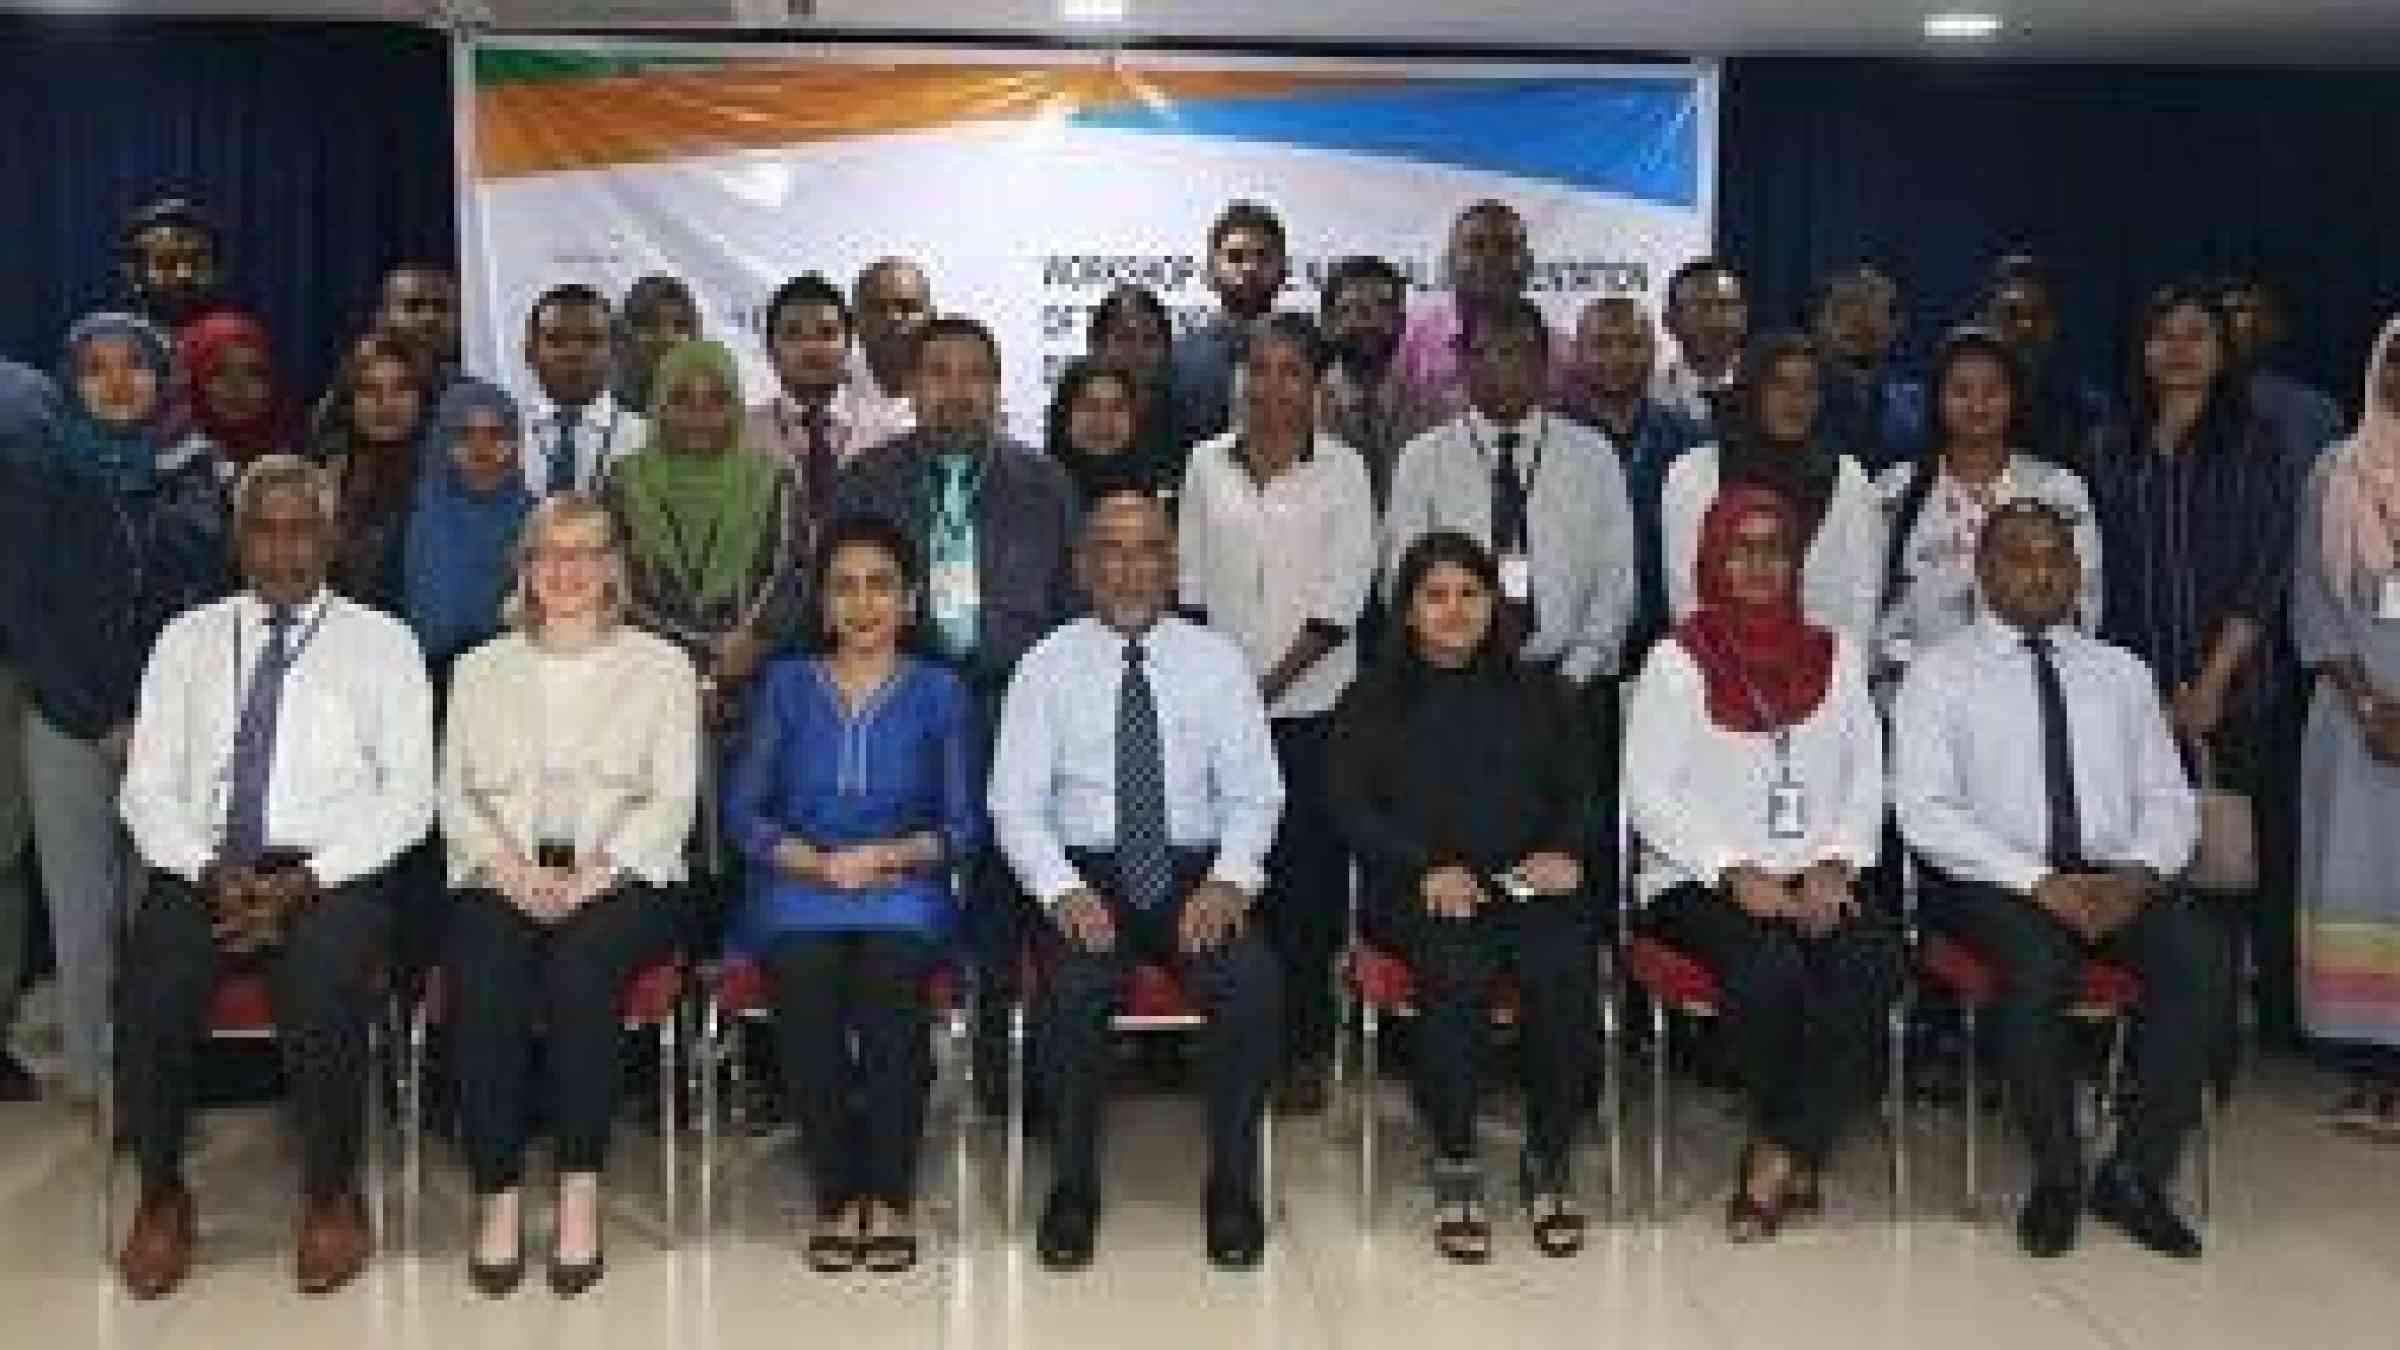 Participants at the workshop in the Maldives spotlighted the links between disaster risk reduction, sustainable development and climate change action (Photo: UNISDR)